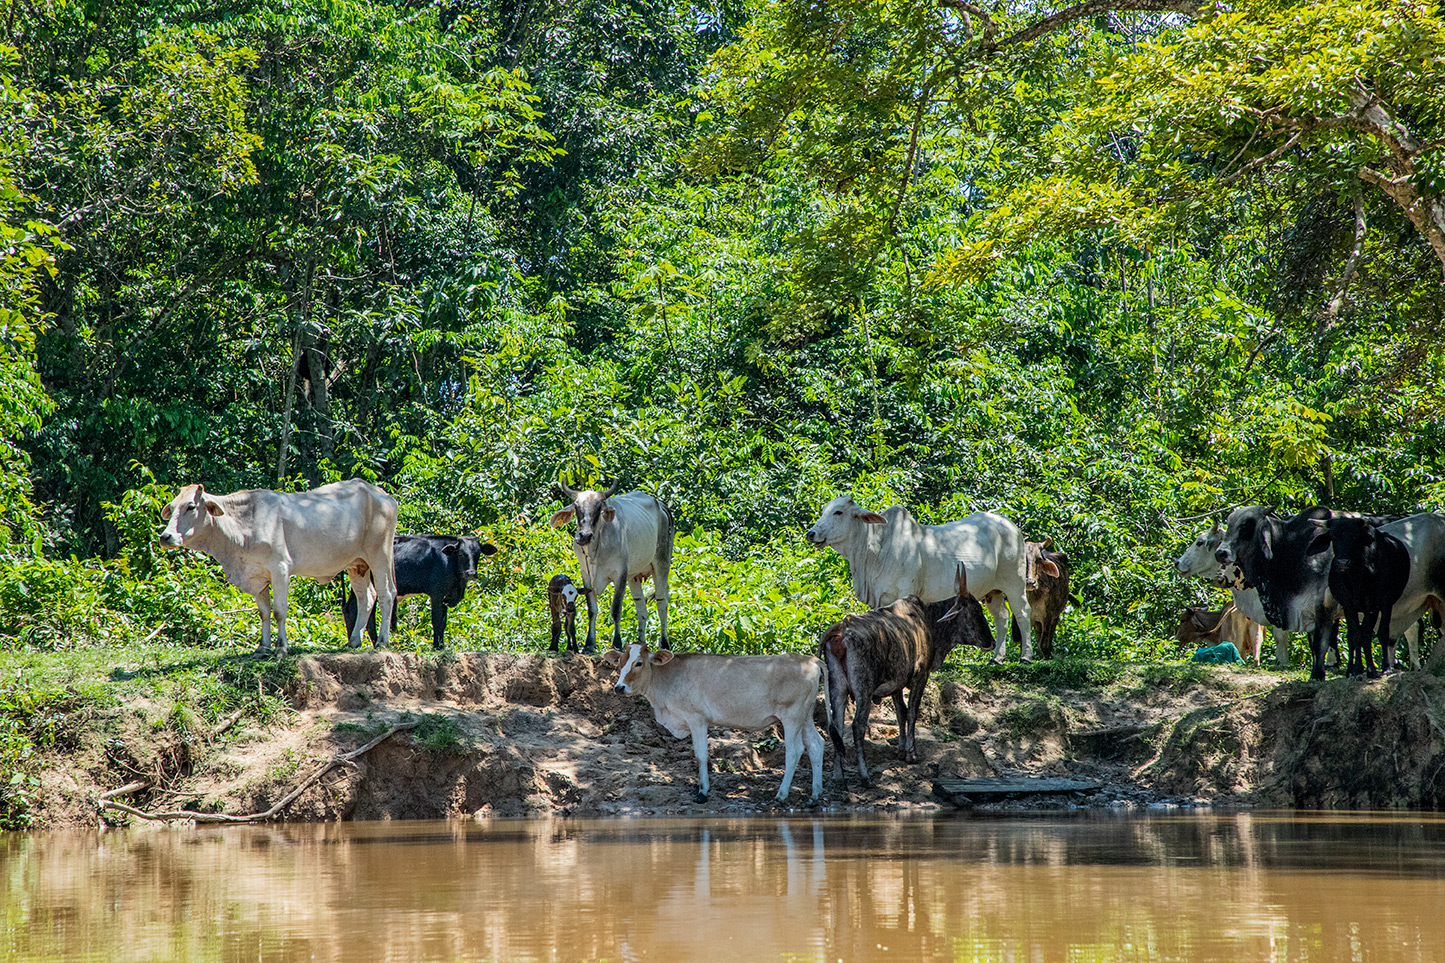 Cattle stands by the river on a deeply eroded land.